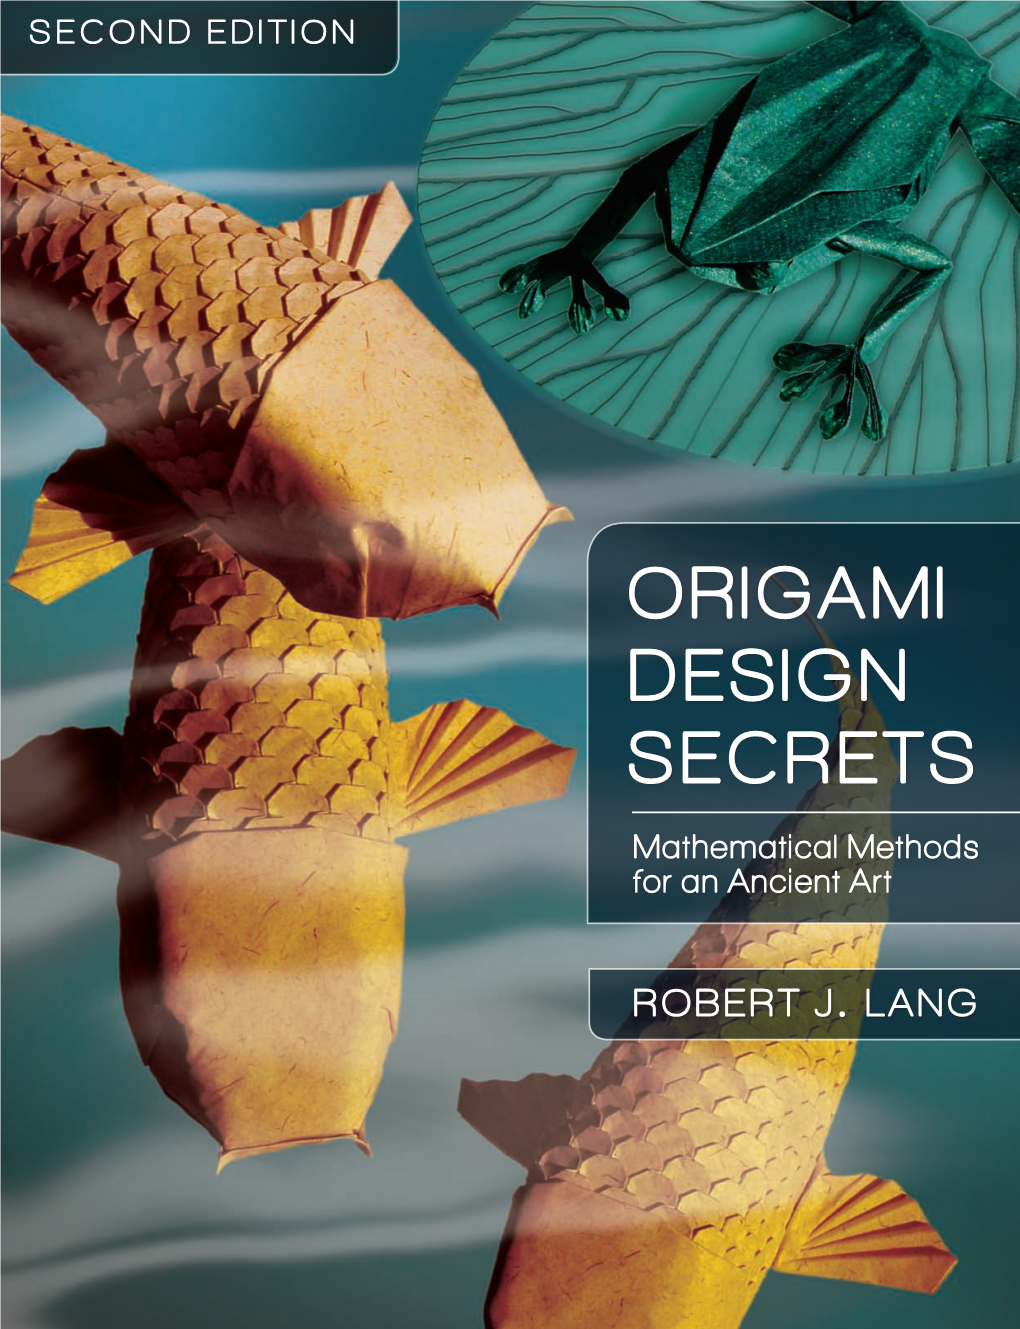 Origami Design Secrets Reveals the Underlying Concepts of Origami and How to Create Original Origami Designs